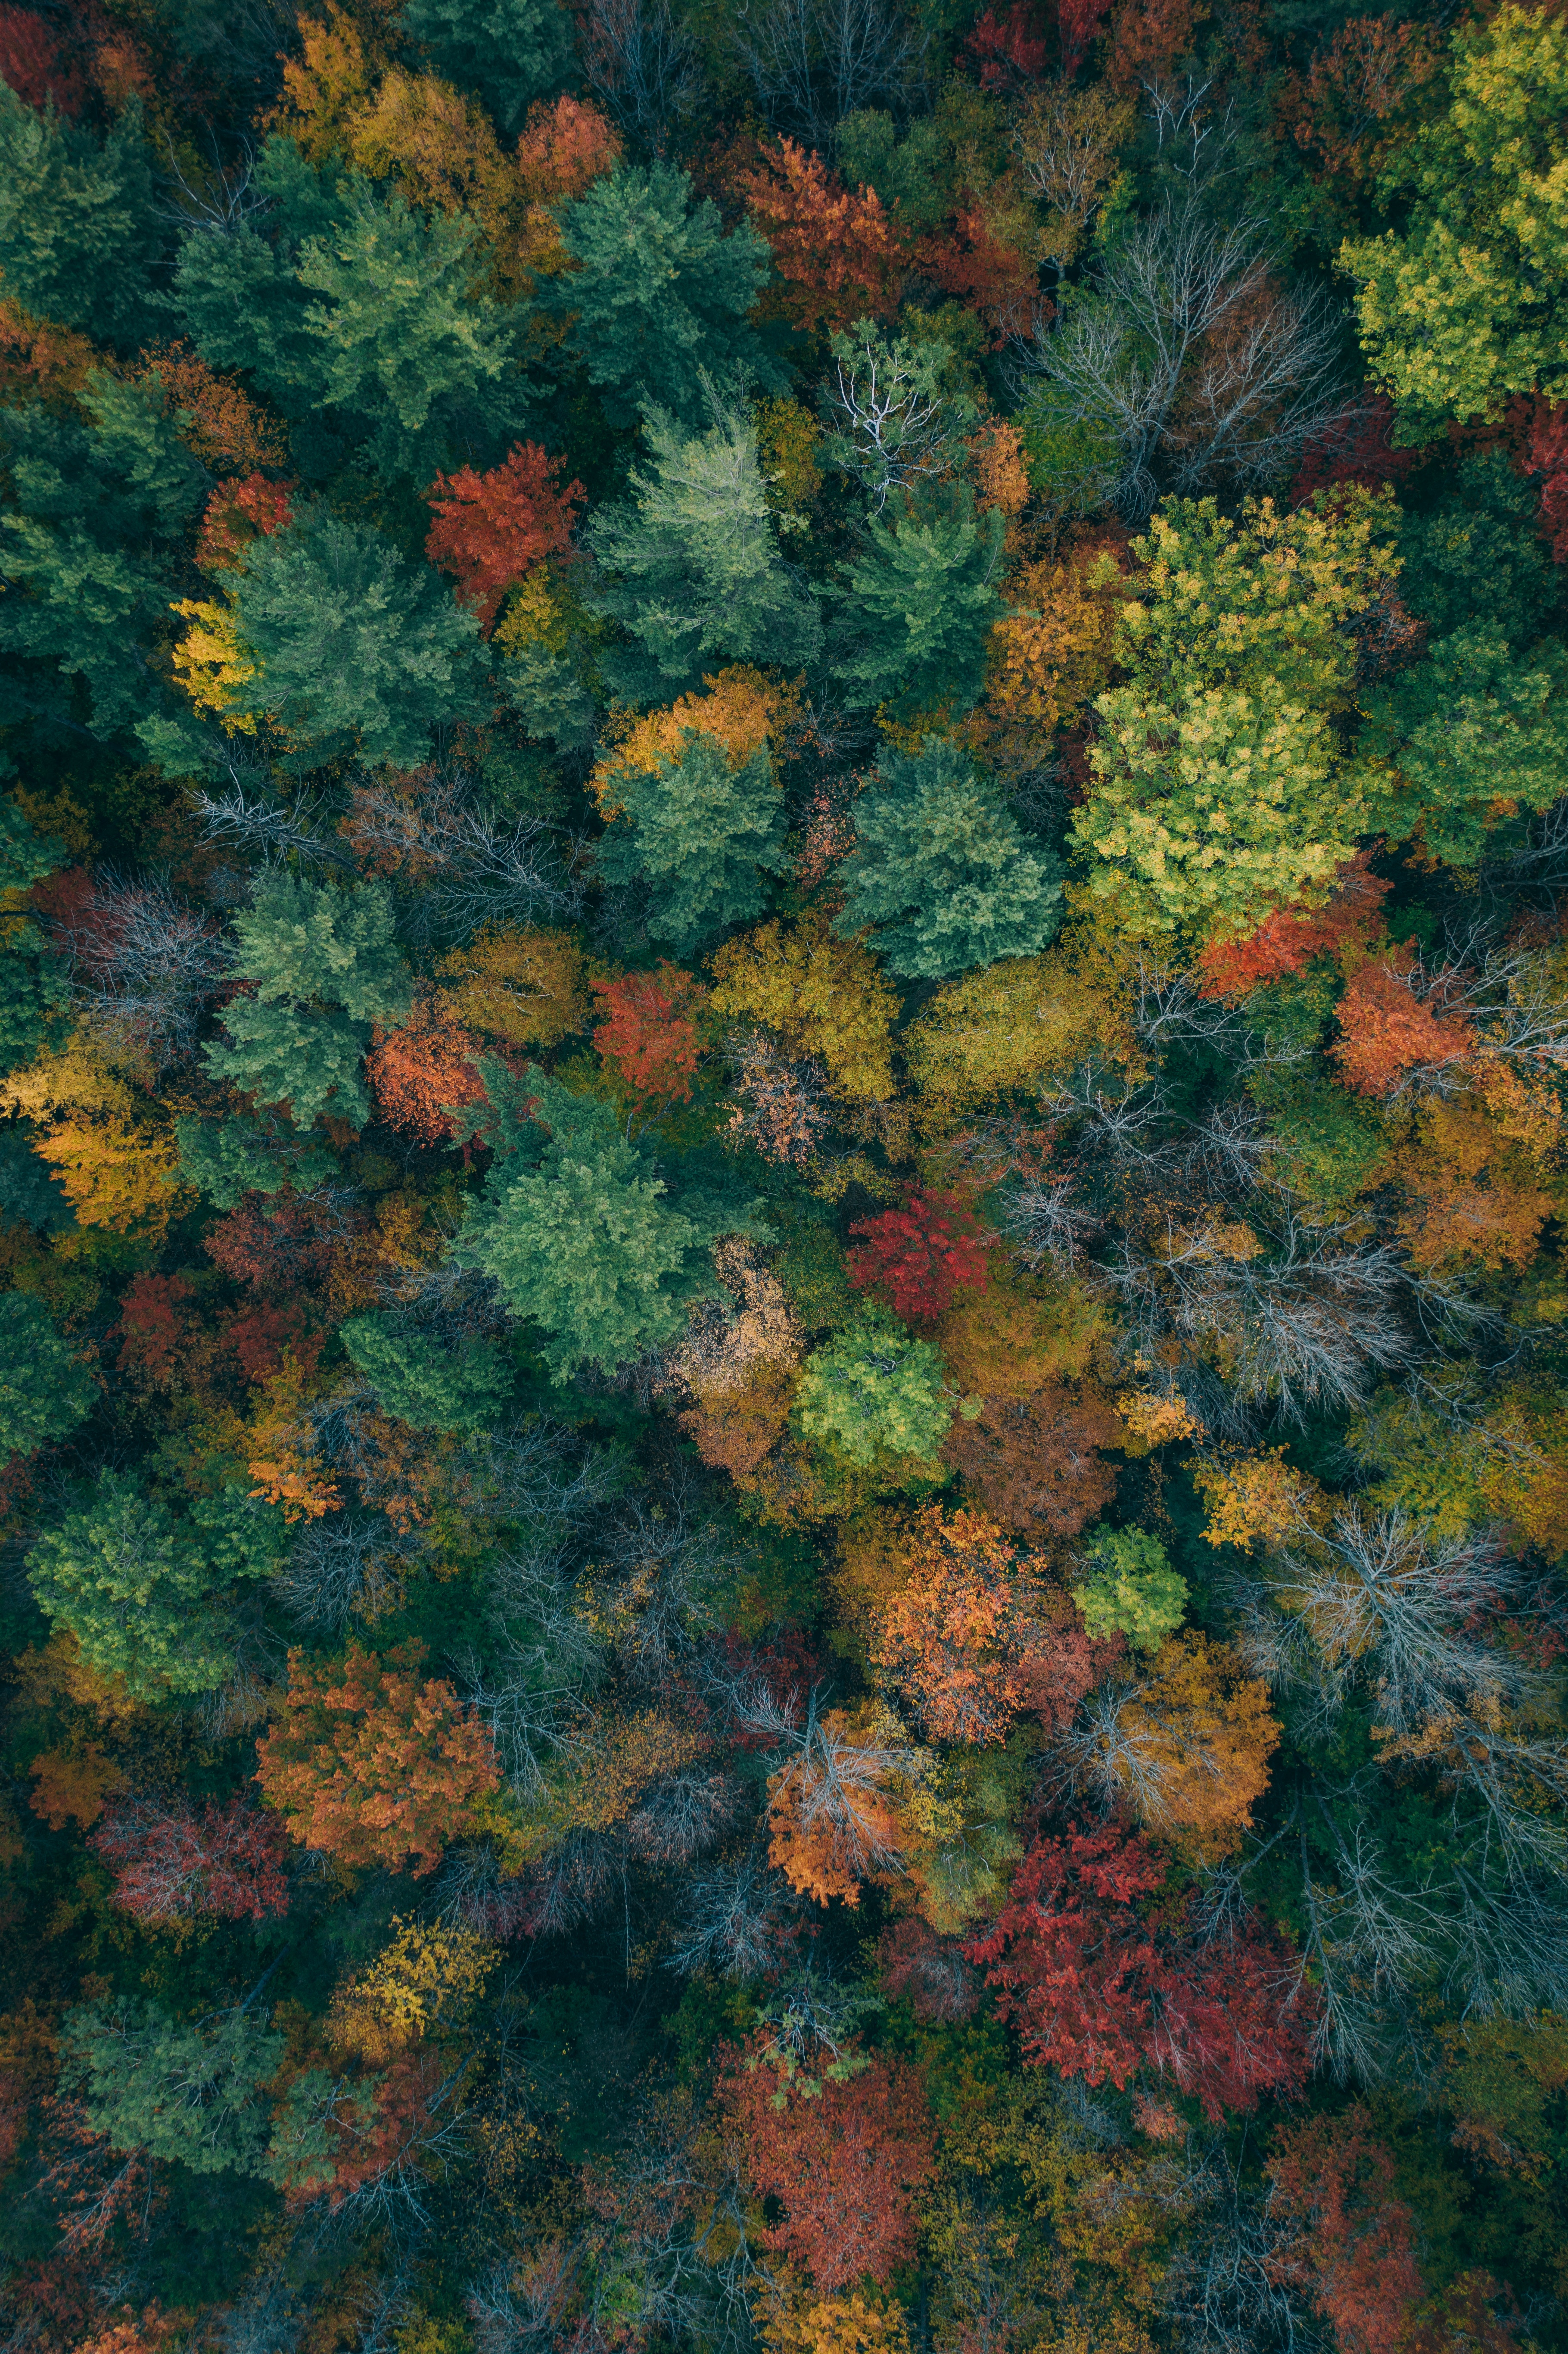 forest, nature, colorful, colourful, autumn colors, autumn paints, autumn, trees, view from above